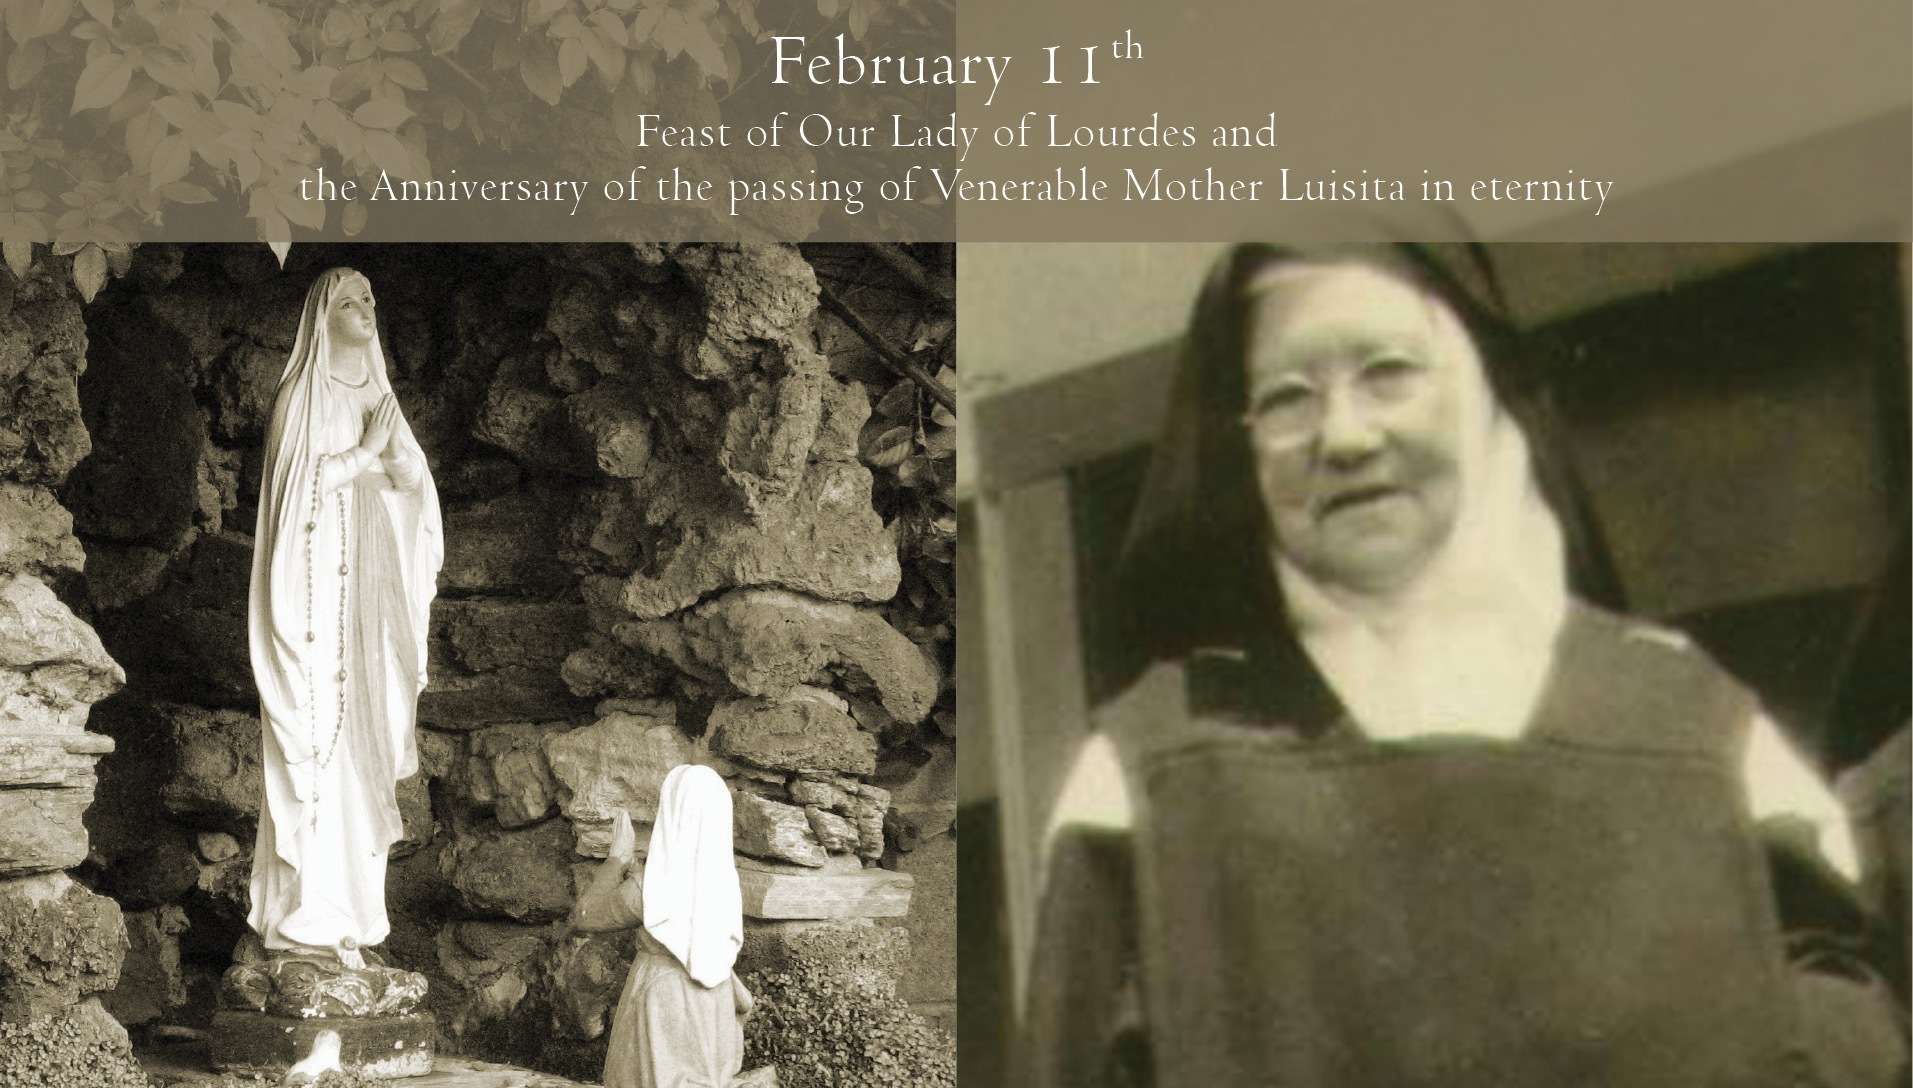 Image of Mother Luisita and our Lady of Lourdes, "February 11th, feast of Our Lady of Lourdes and the Anniversary of the passing of Venerable Mother Luisita in eternitiy"